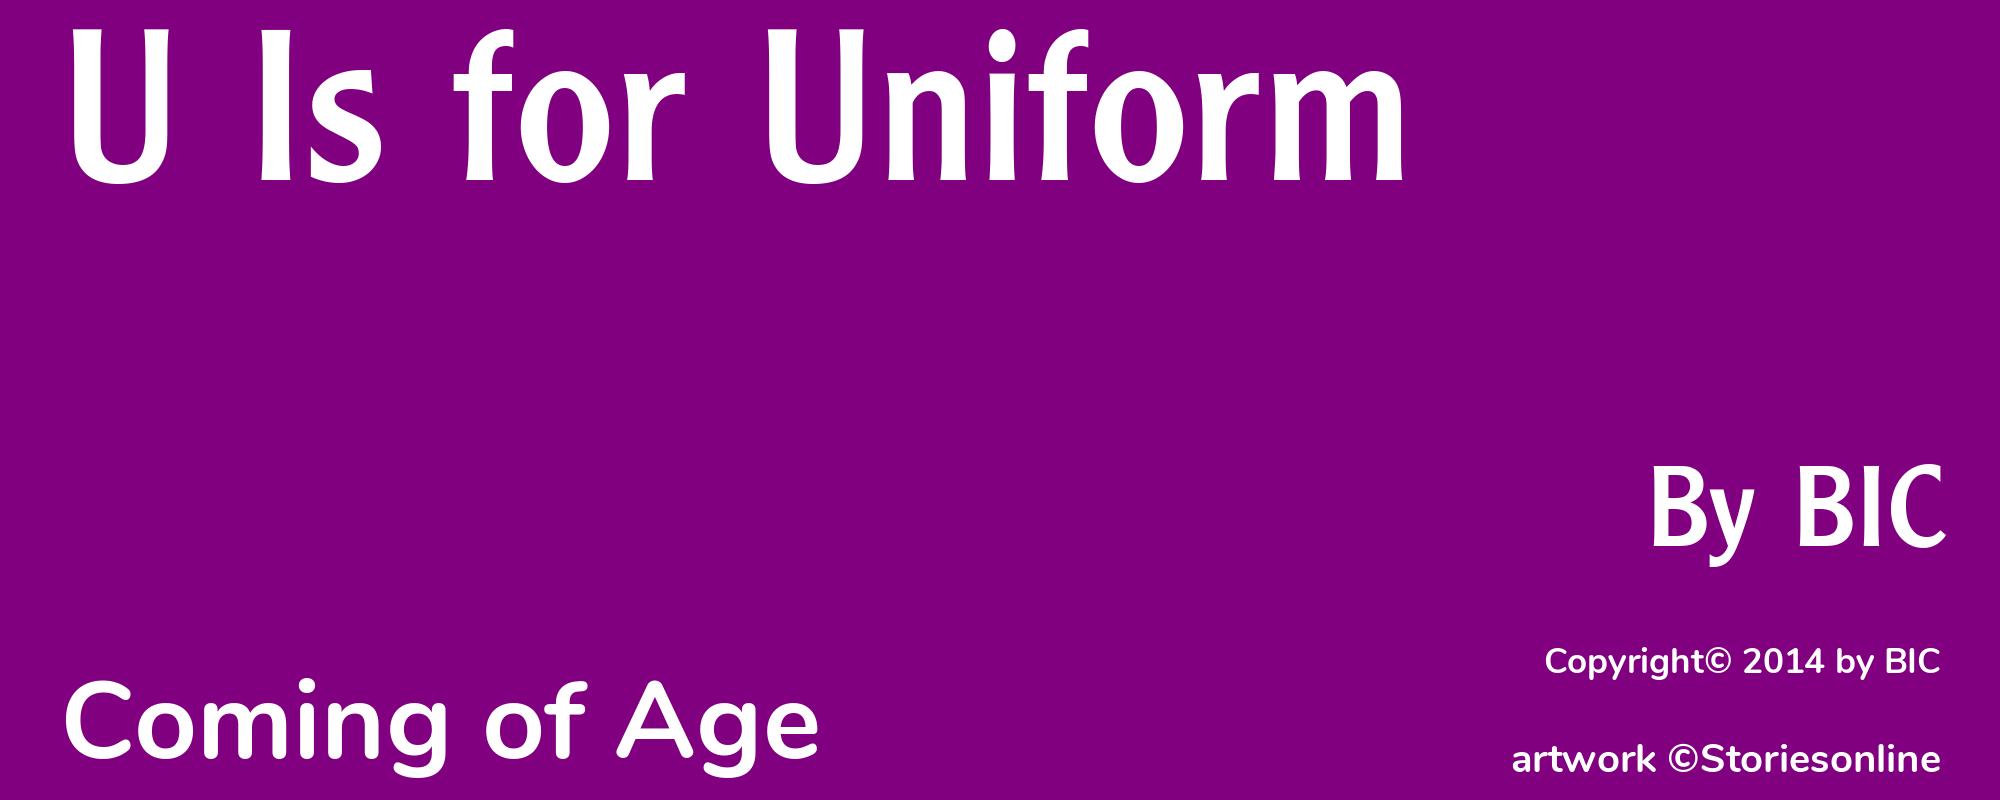 U Is for Uniform - Cover